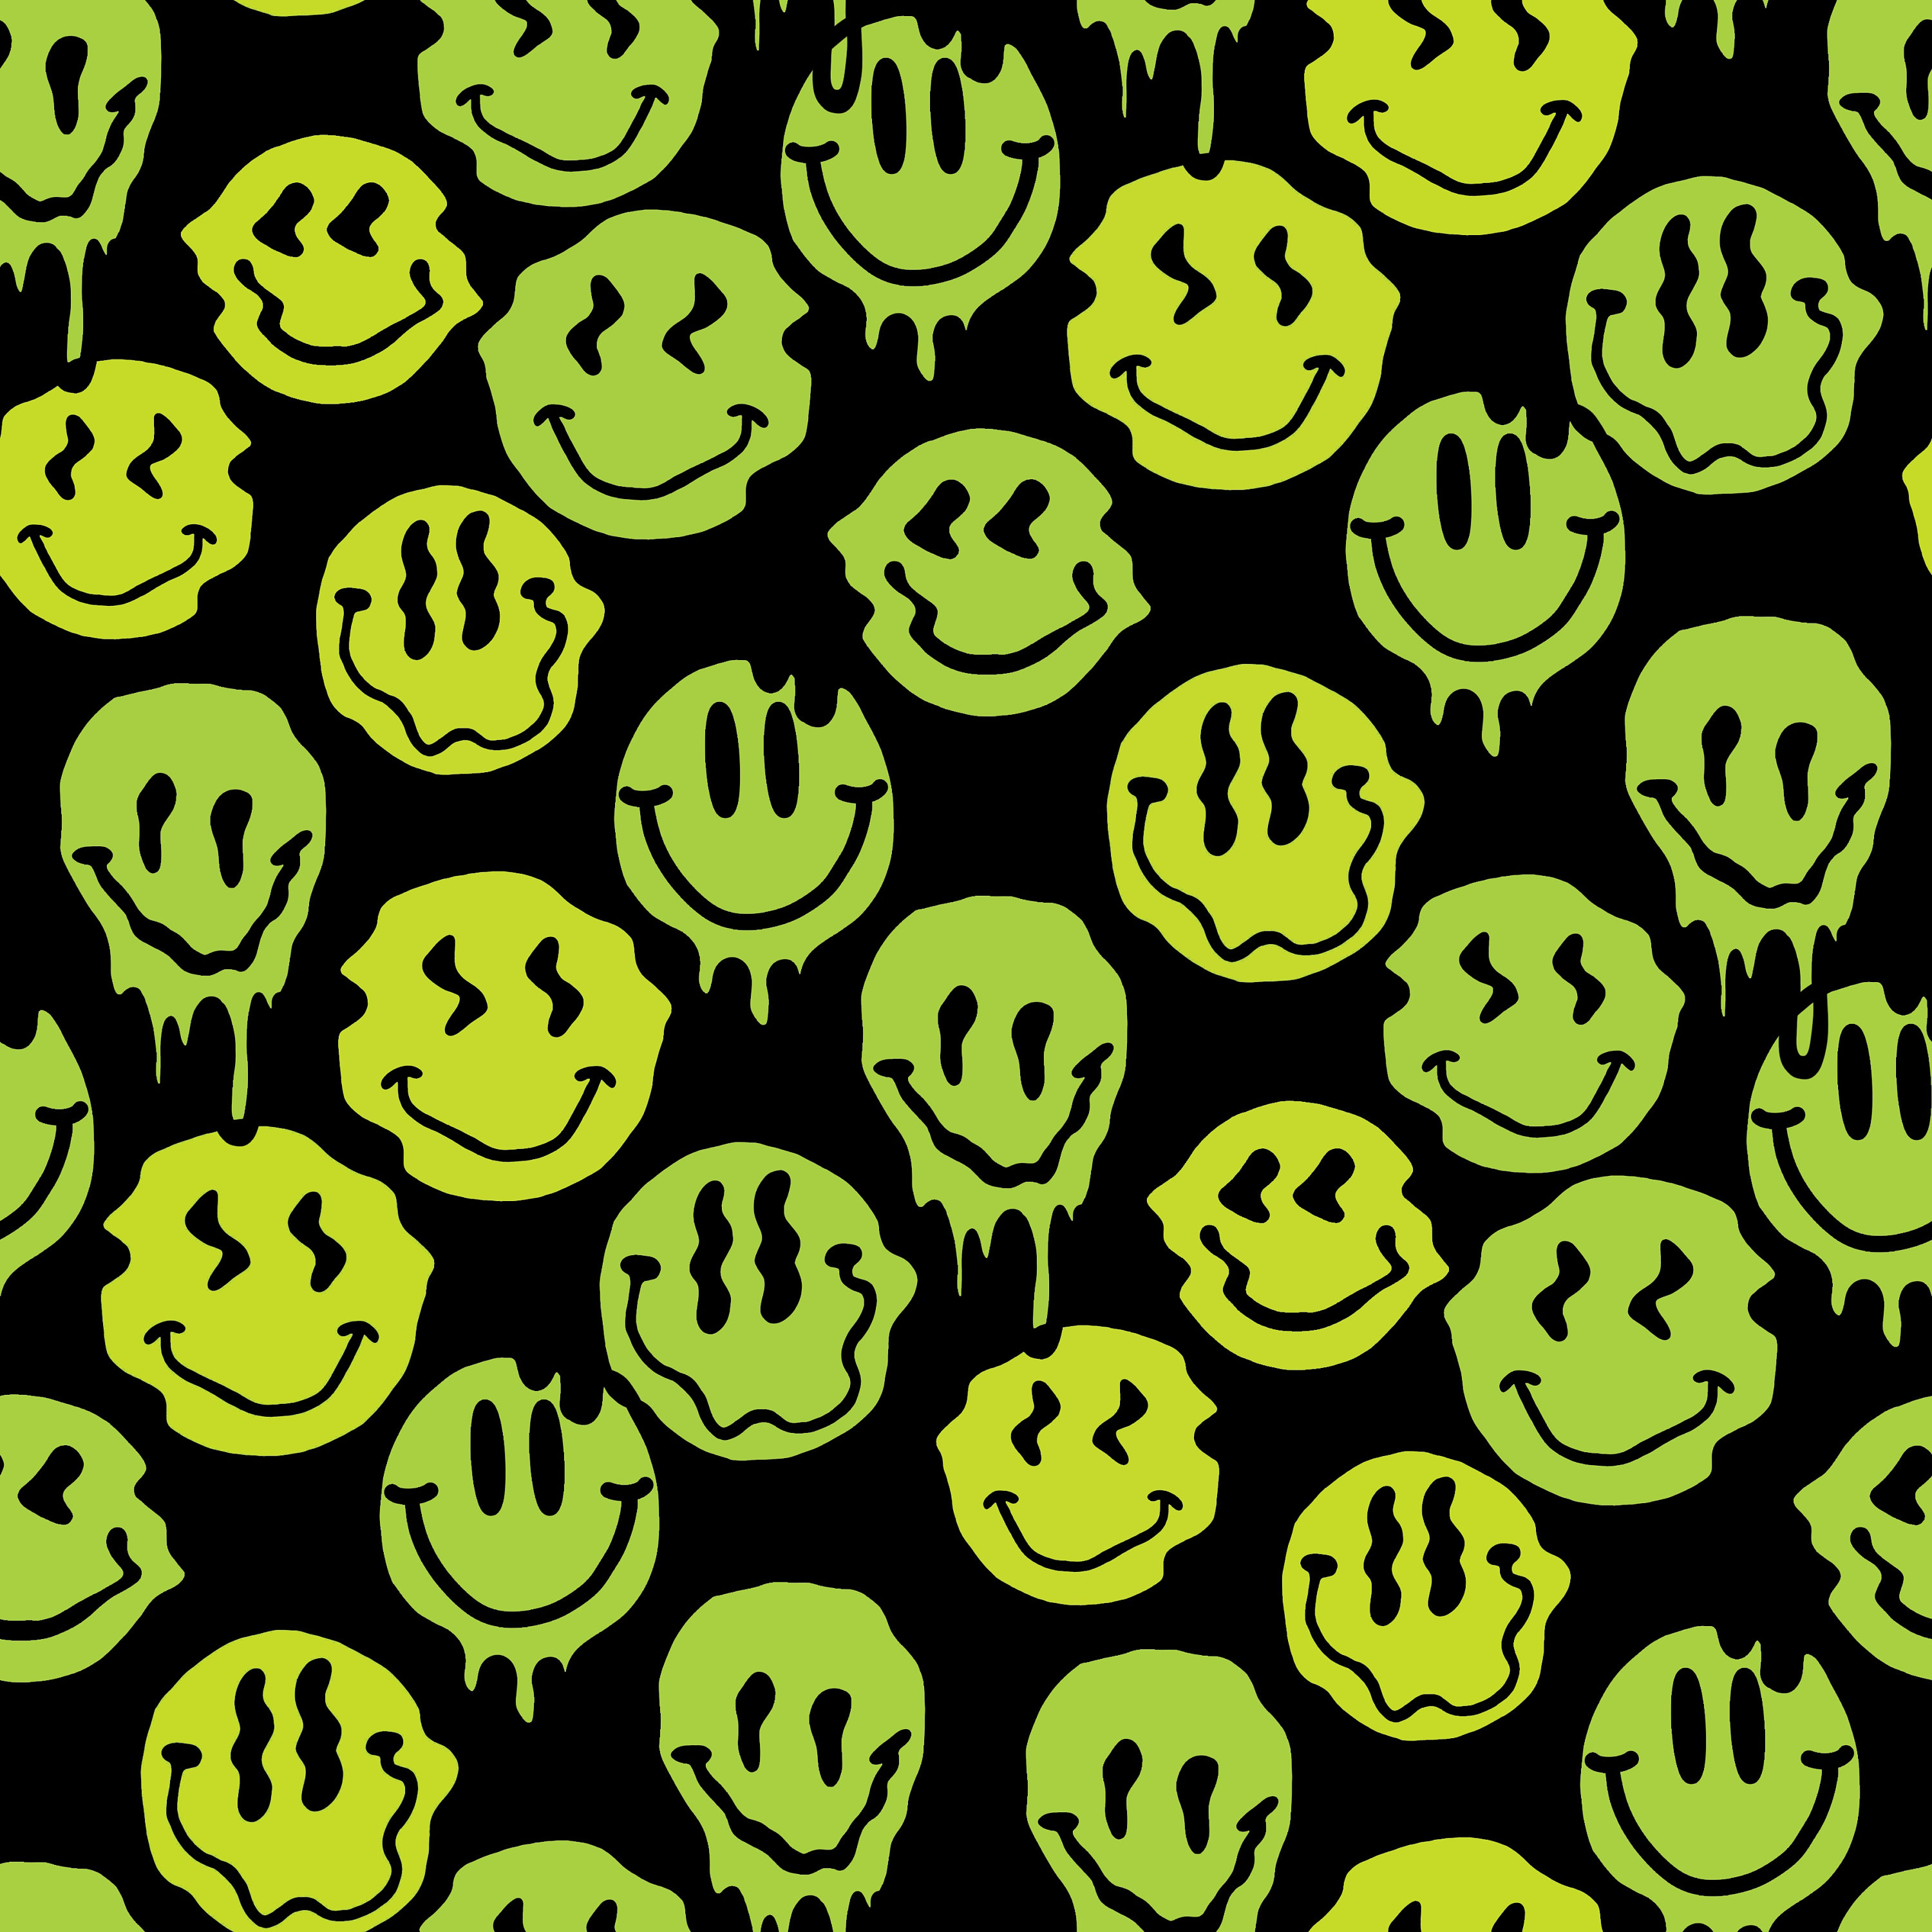 Drippy Smiley Faces Wallpapers - Wallpaper Cave